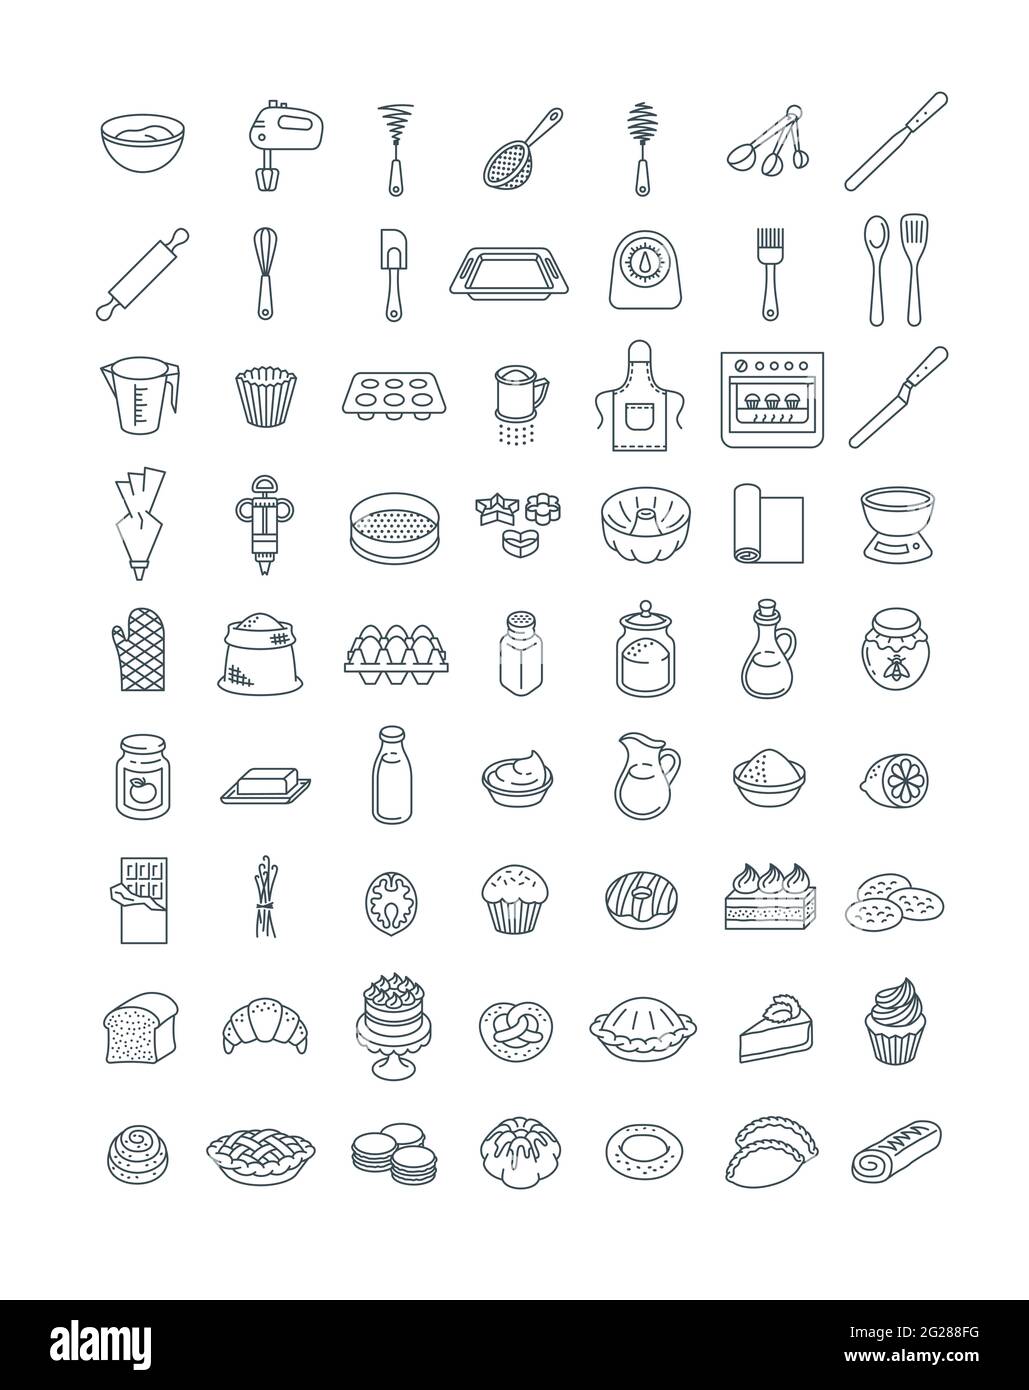 Baking ingredients food and cooking kitchen items Vector Image